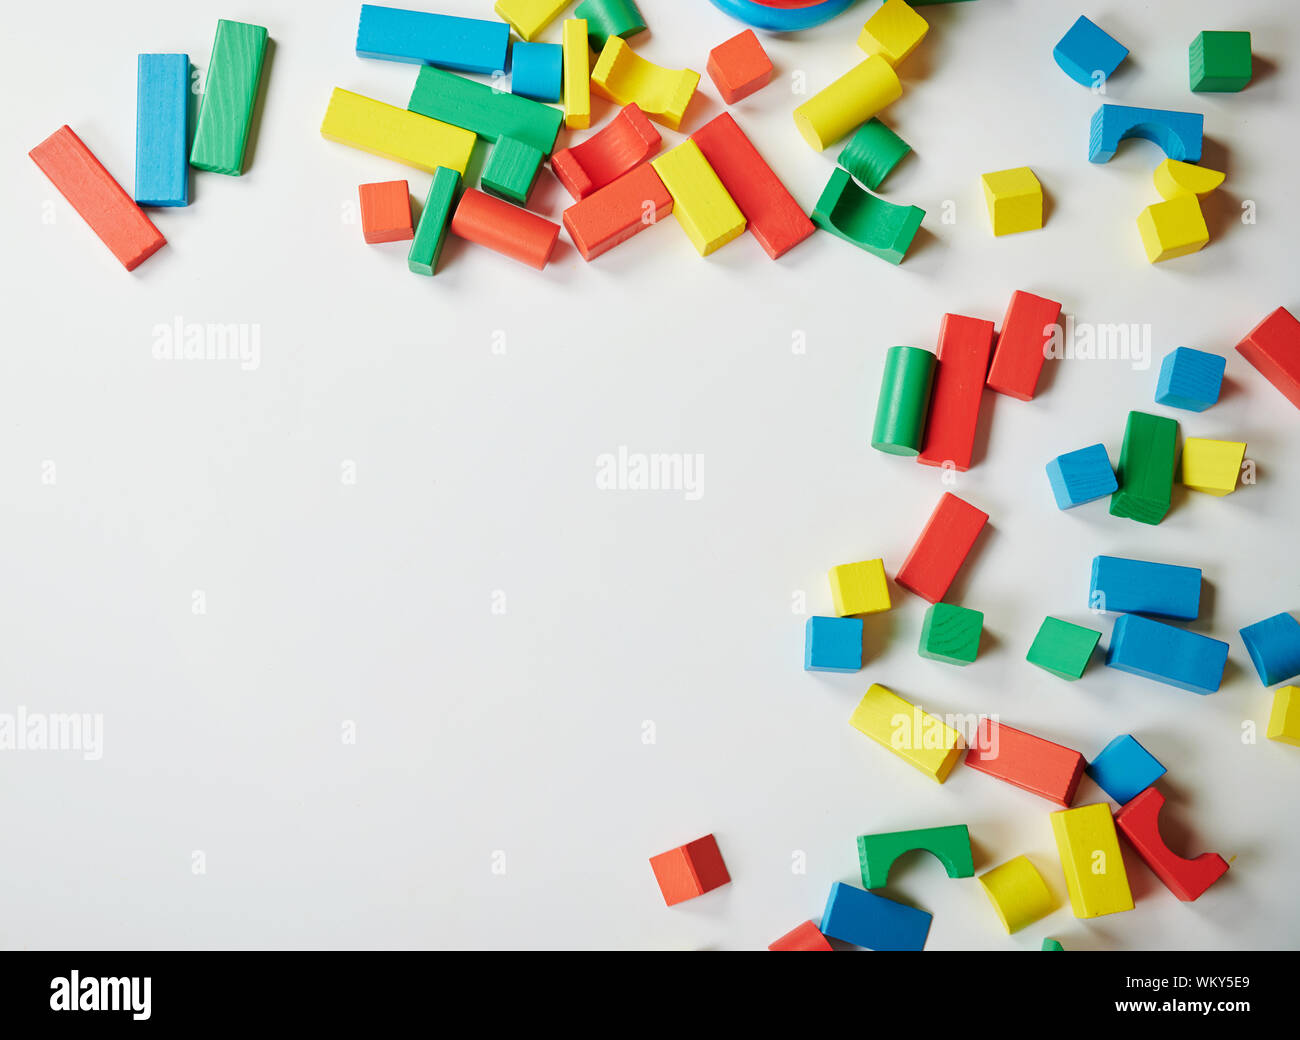 Copy space around colorful wooden bricks abstract background Stock Photo